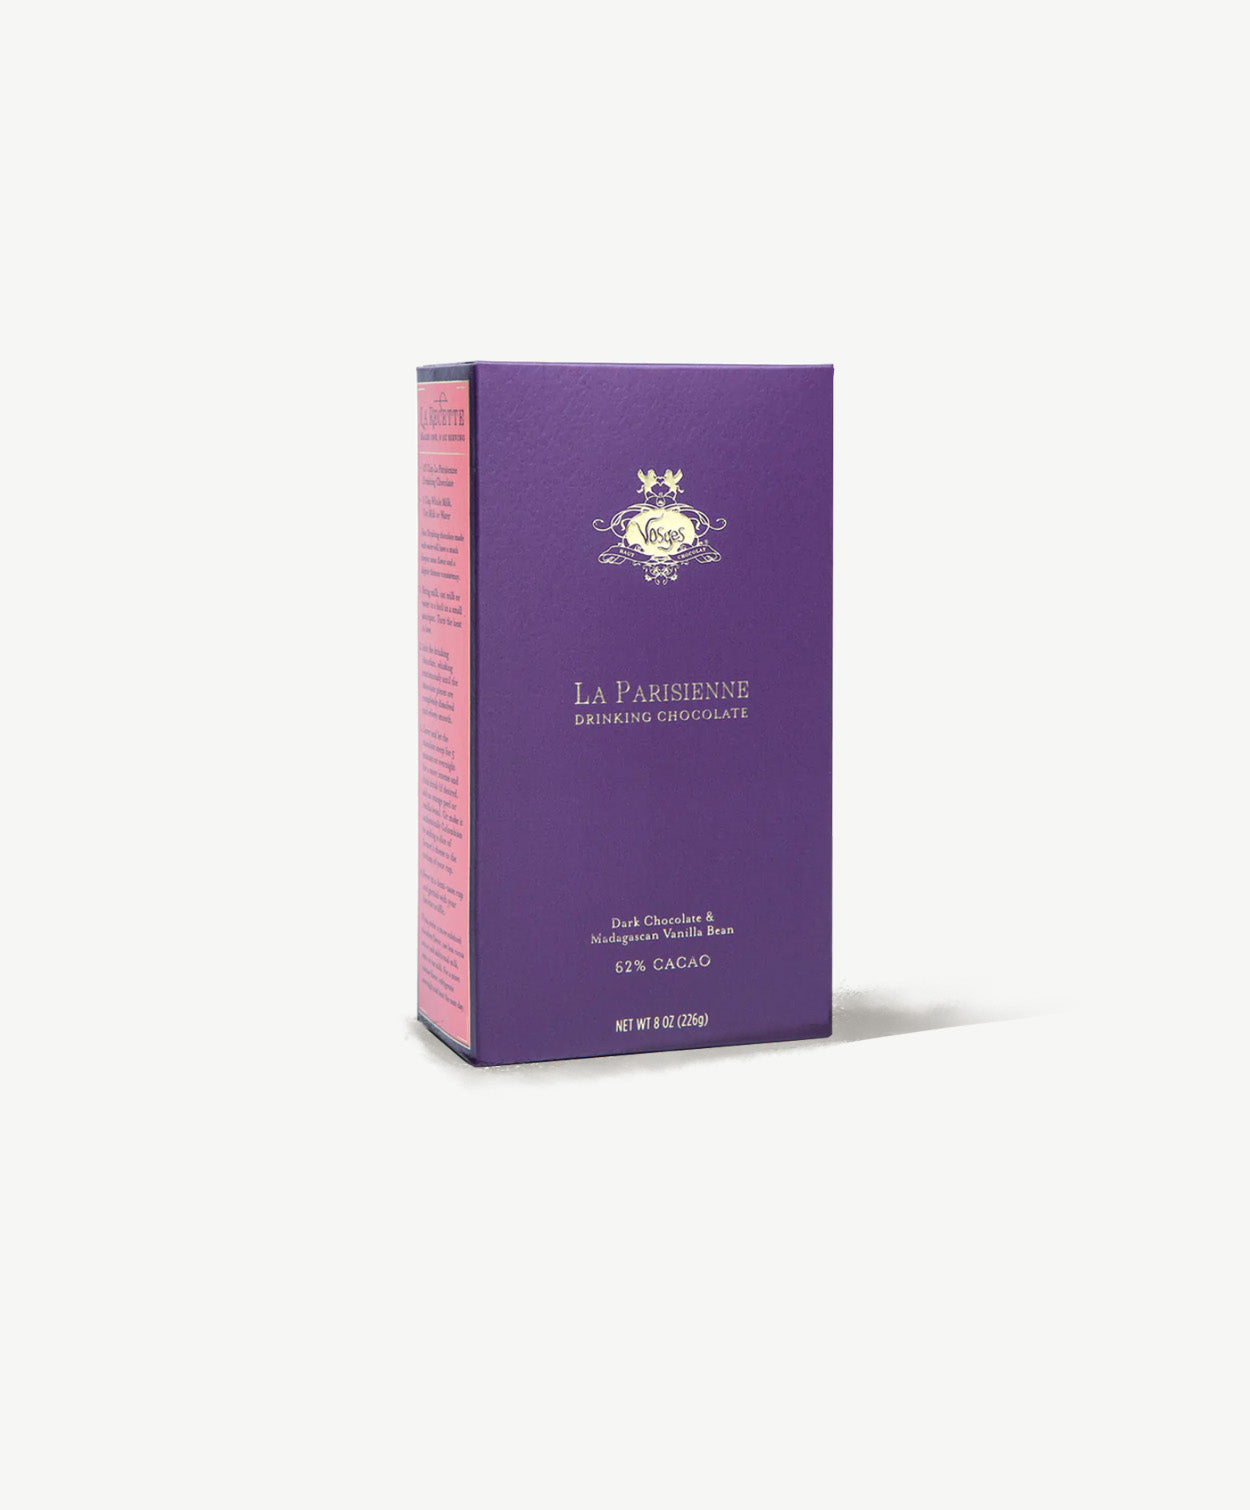 A dark purple Vosges box reading, "La Parisienne Drinking Chocolate" stands upright against a light grey background.